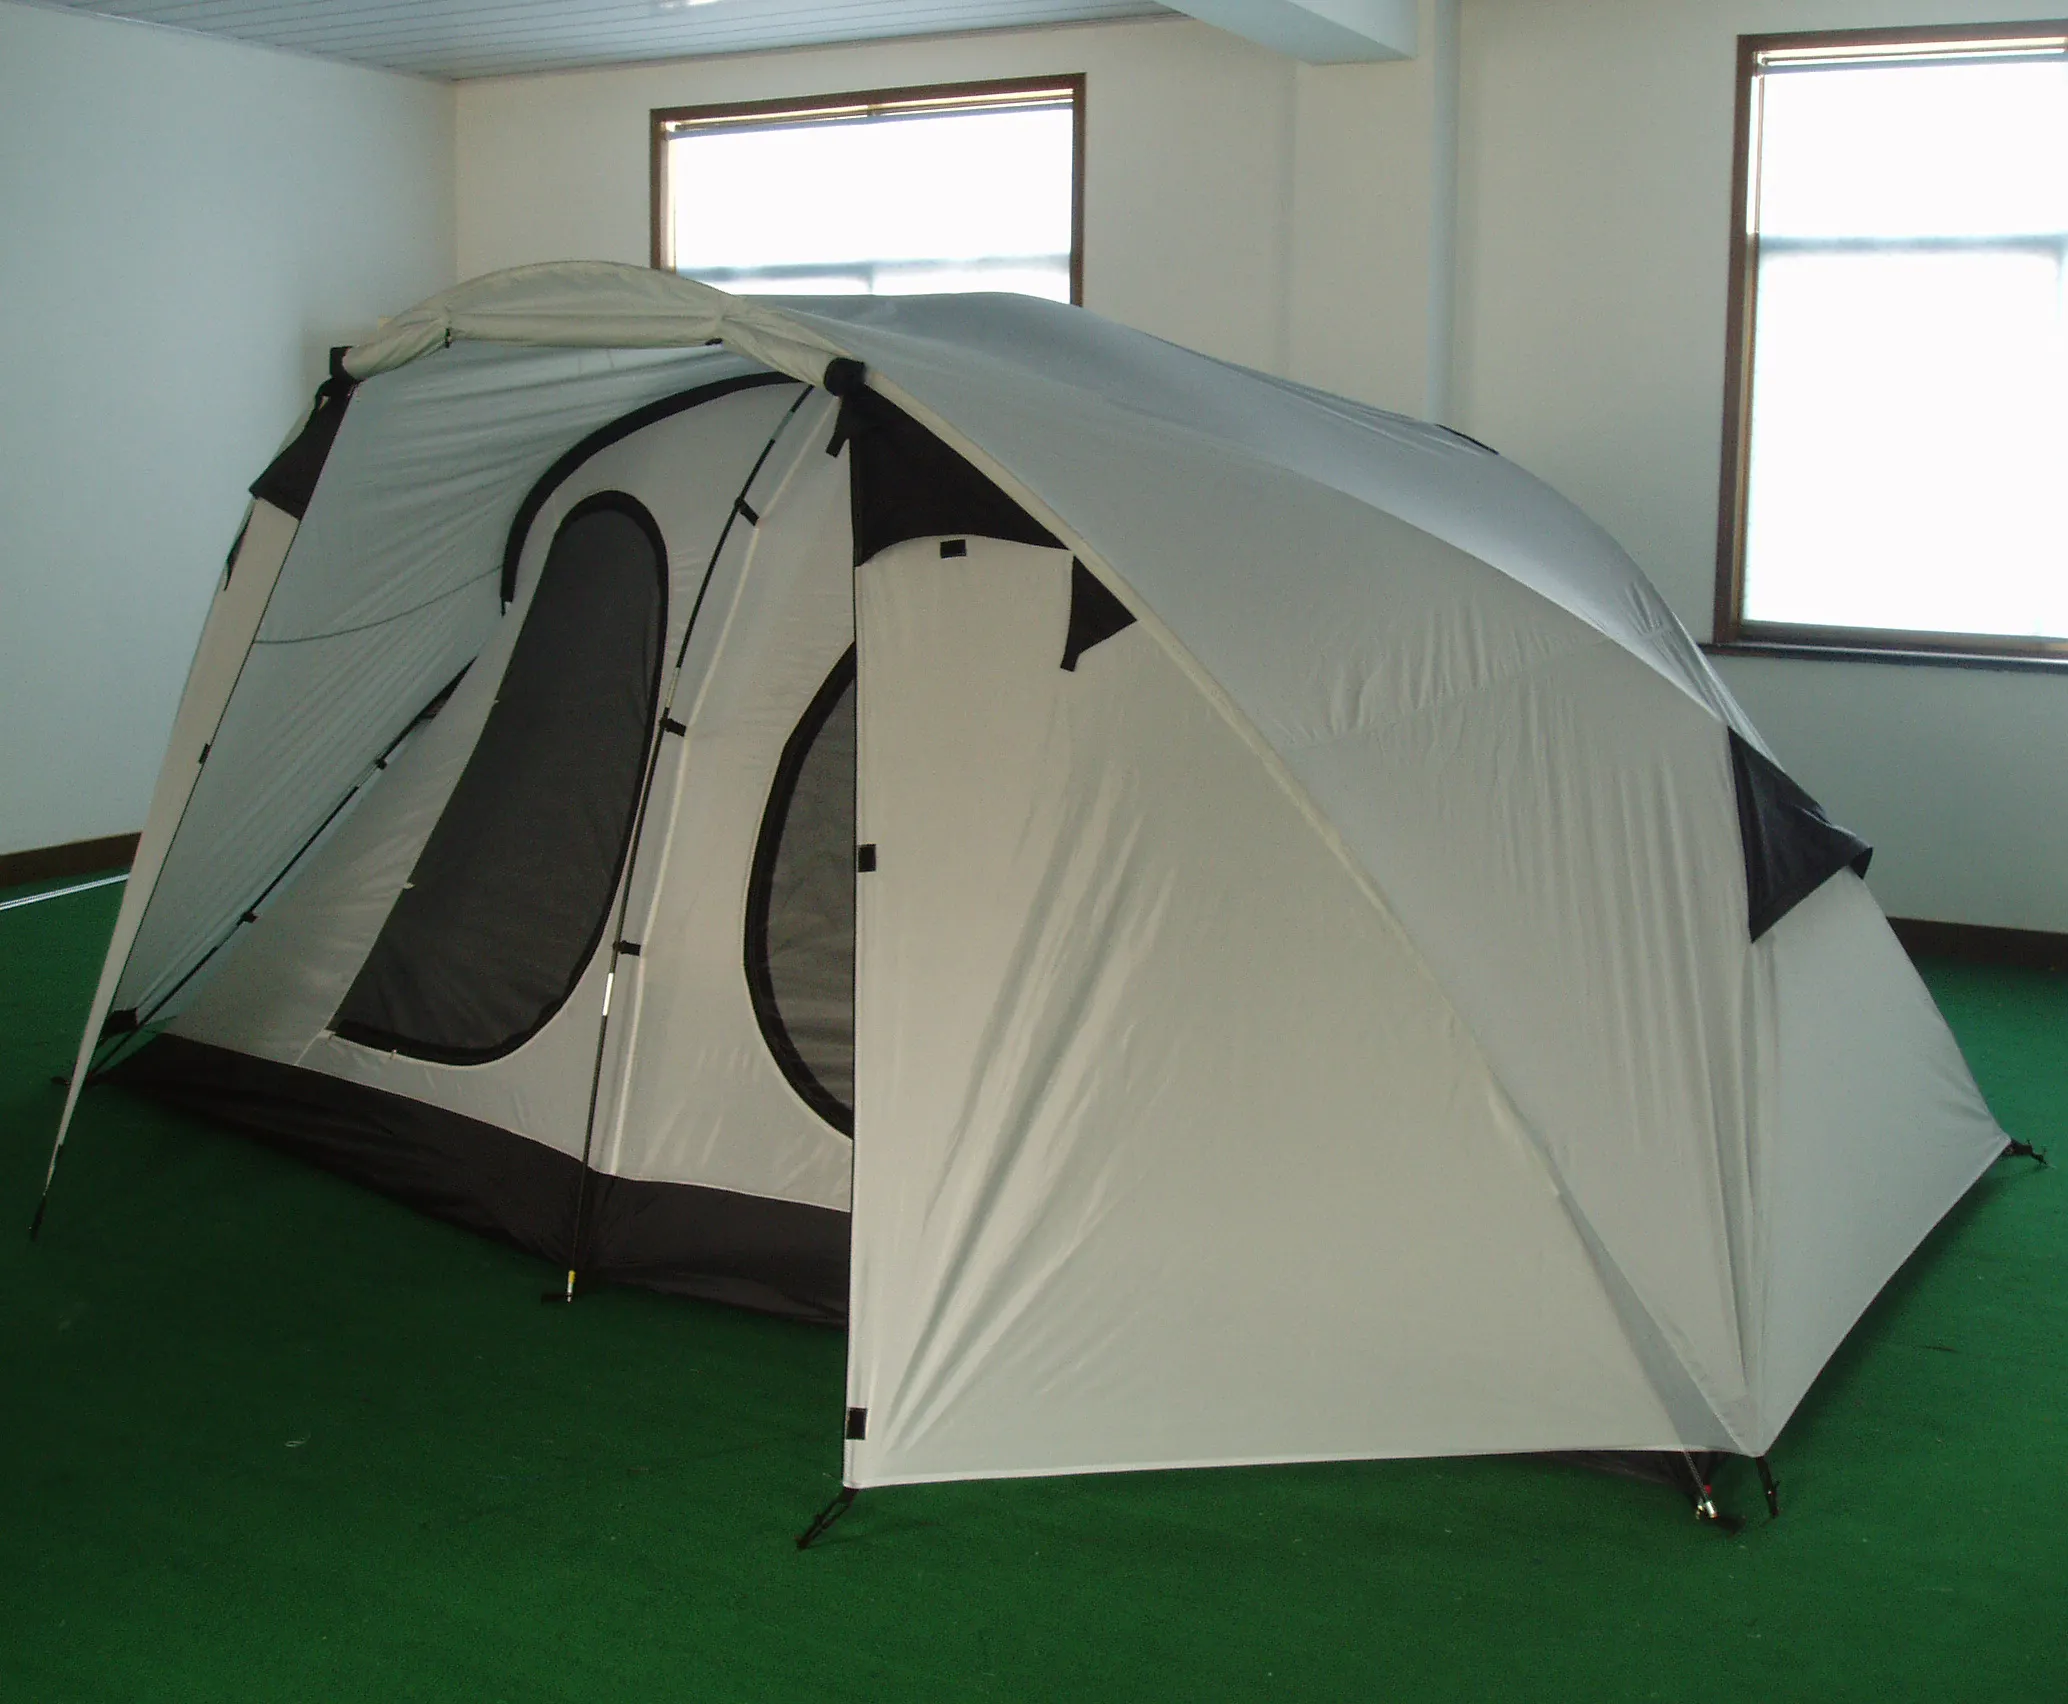 CZX-361 Family Camping Tent 8-Person 2 Rooms with Separate Doors. Waterproof Roomy Fits Up to 2 Room Size Instant Dome Tent